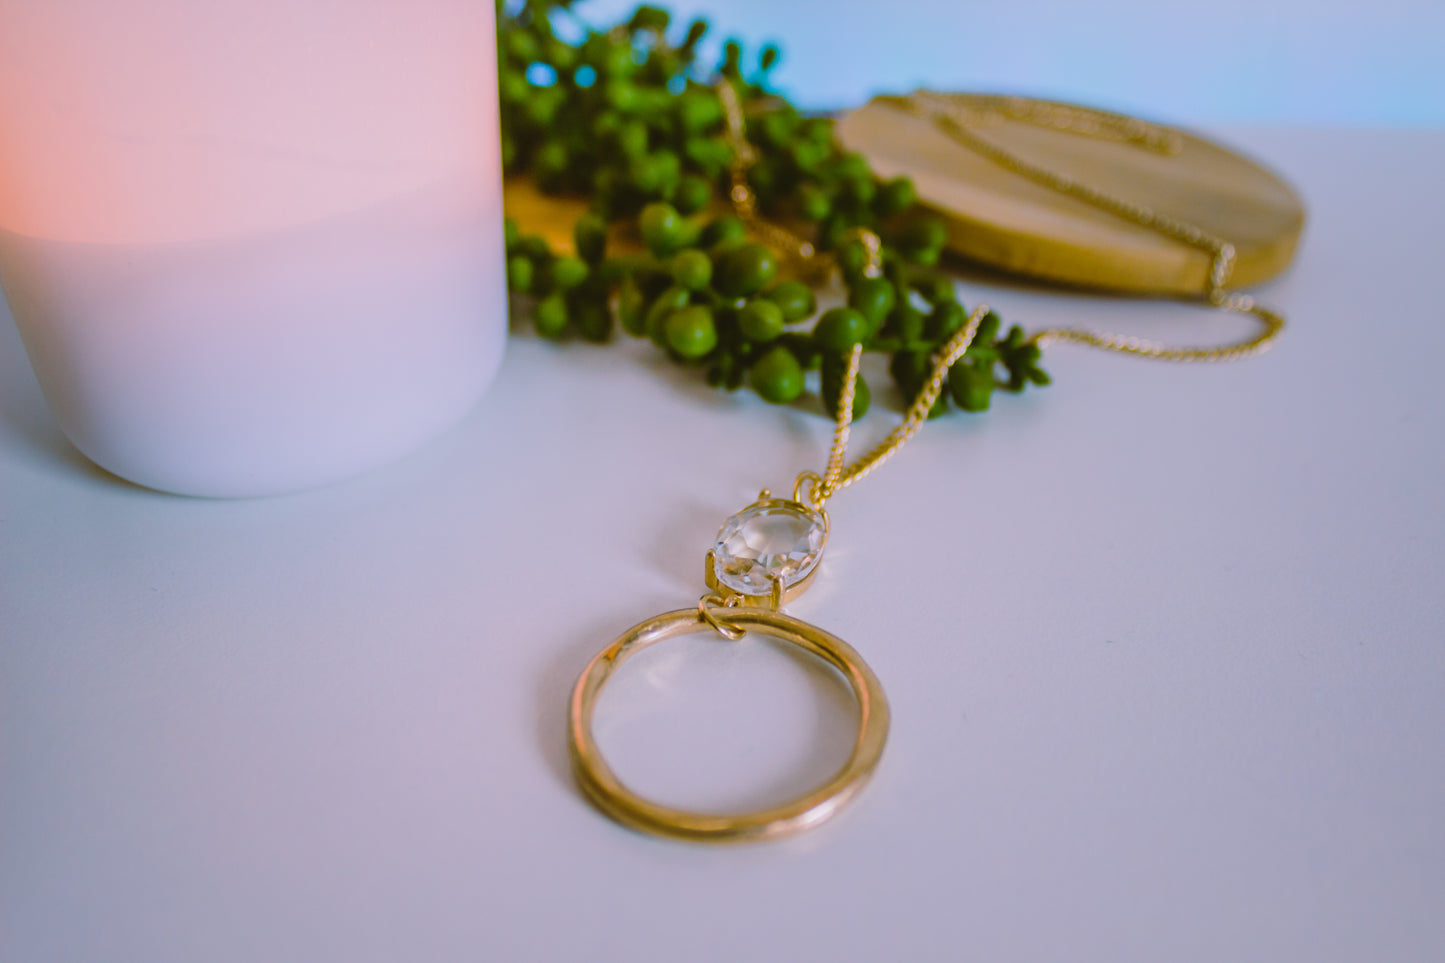 FOUR CORNERS NECKLACE - GOLD HOOP WITH GEM